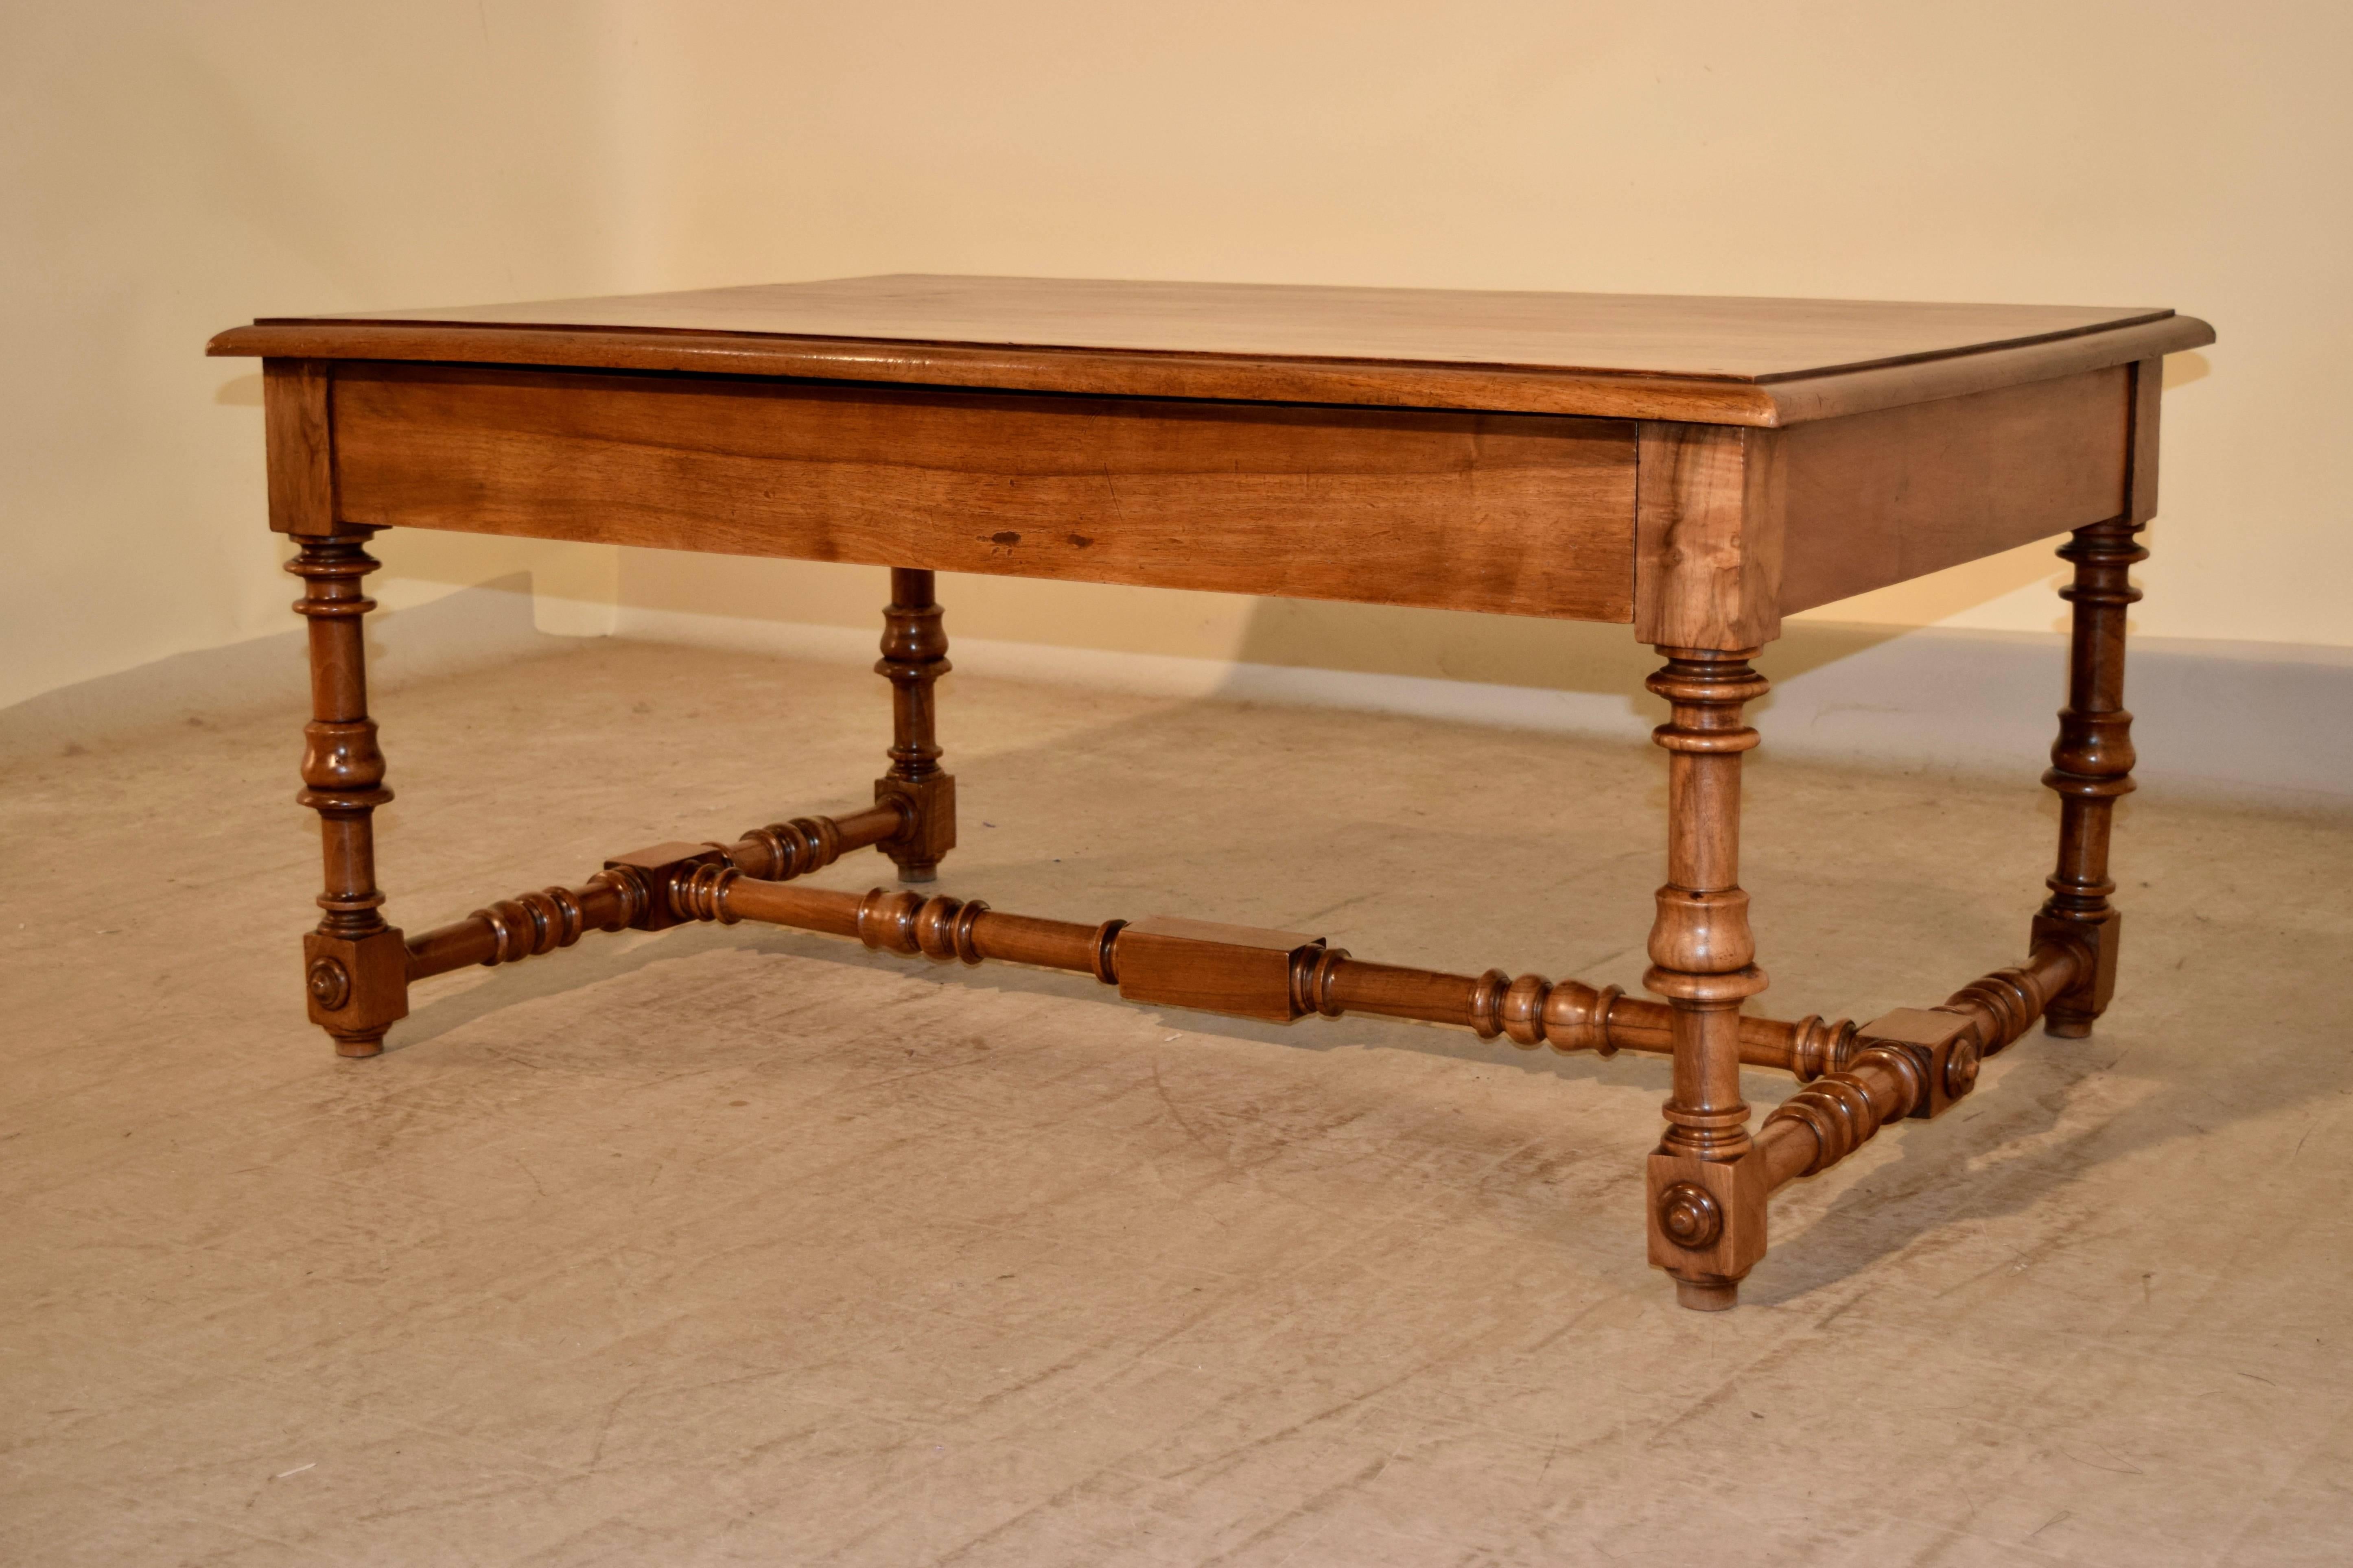 19th century walnut coffee table from France with a beveled edge around the top, following down to a simple apron which contains a single long drawer in the front. The legs are wonderfully hand-turned and are joined by a hand-turned stretcher.